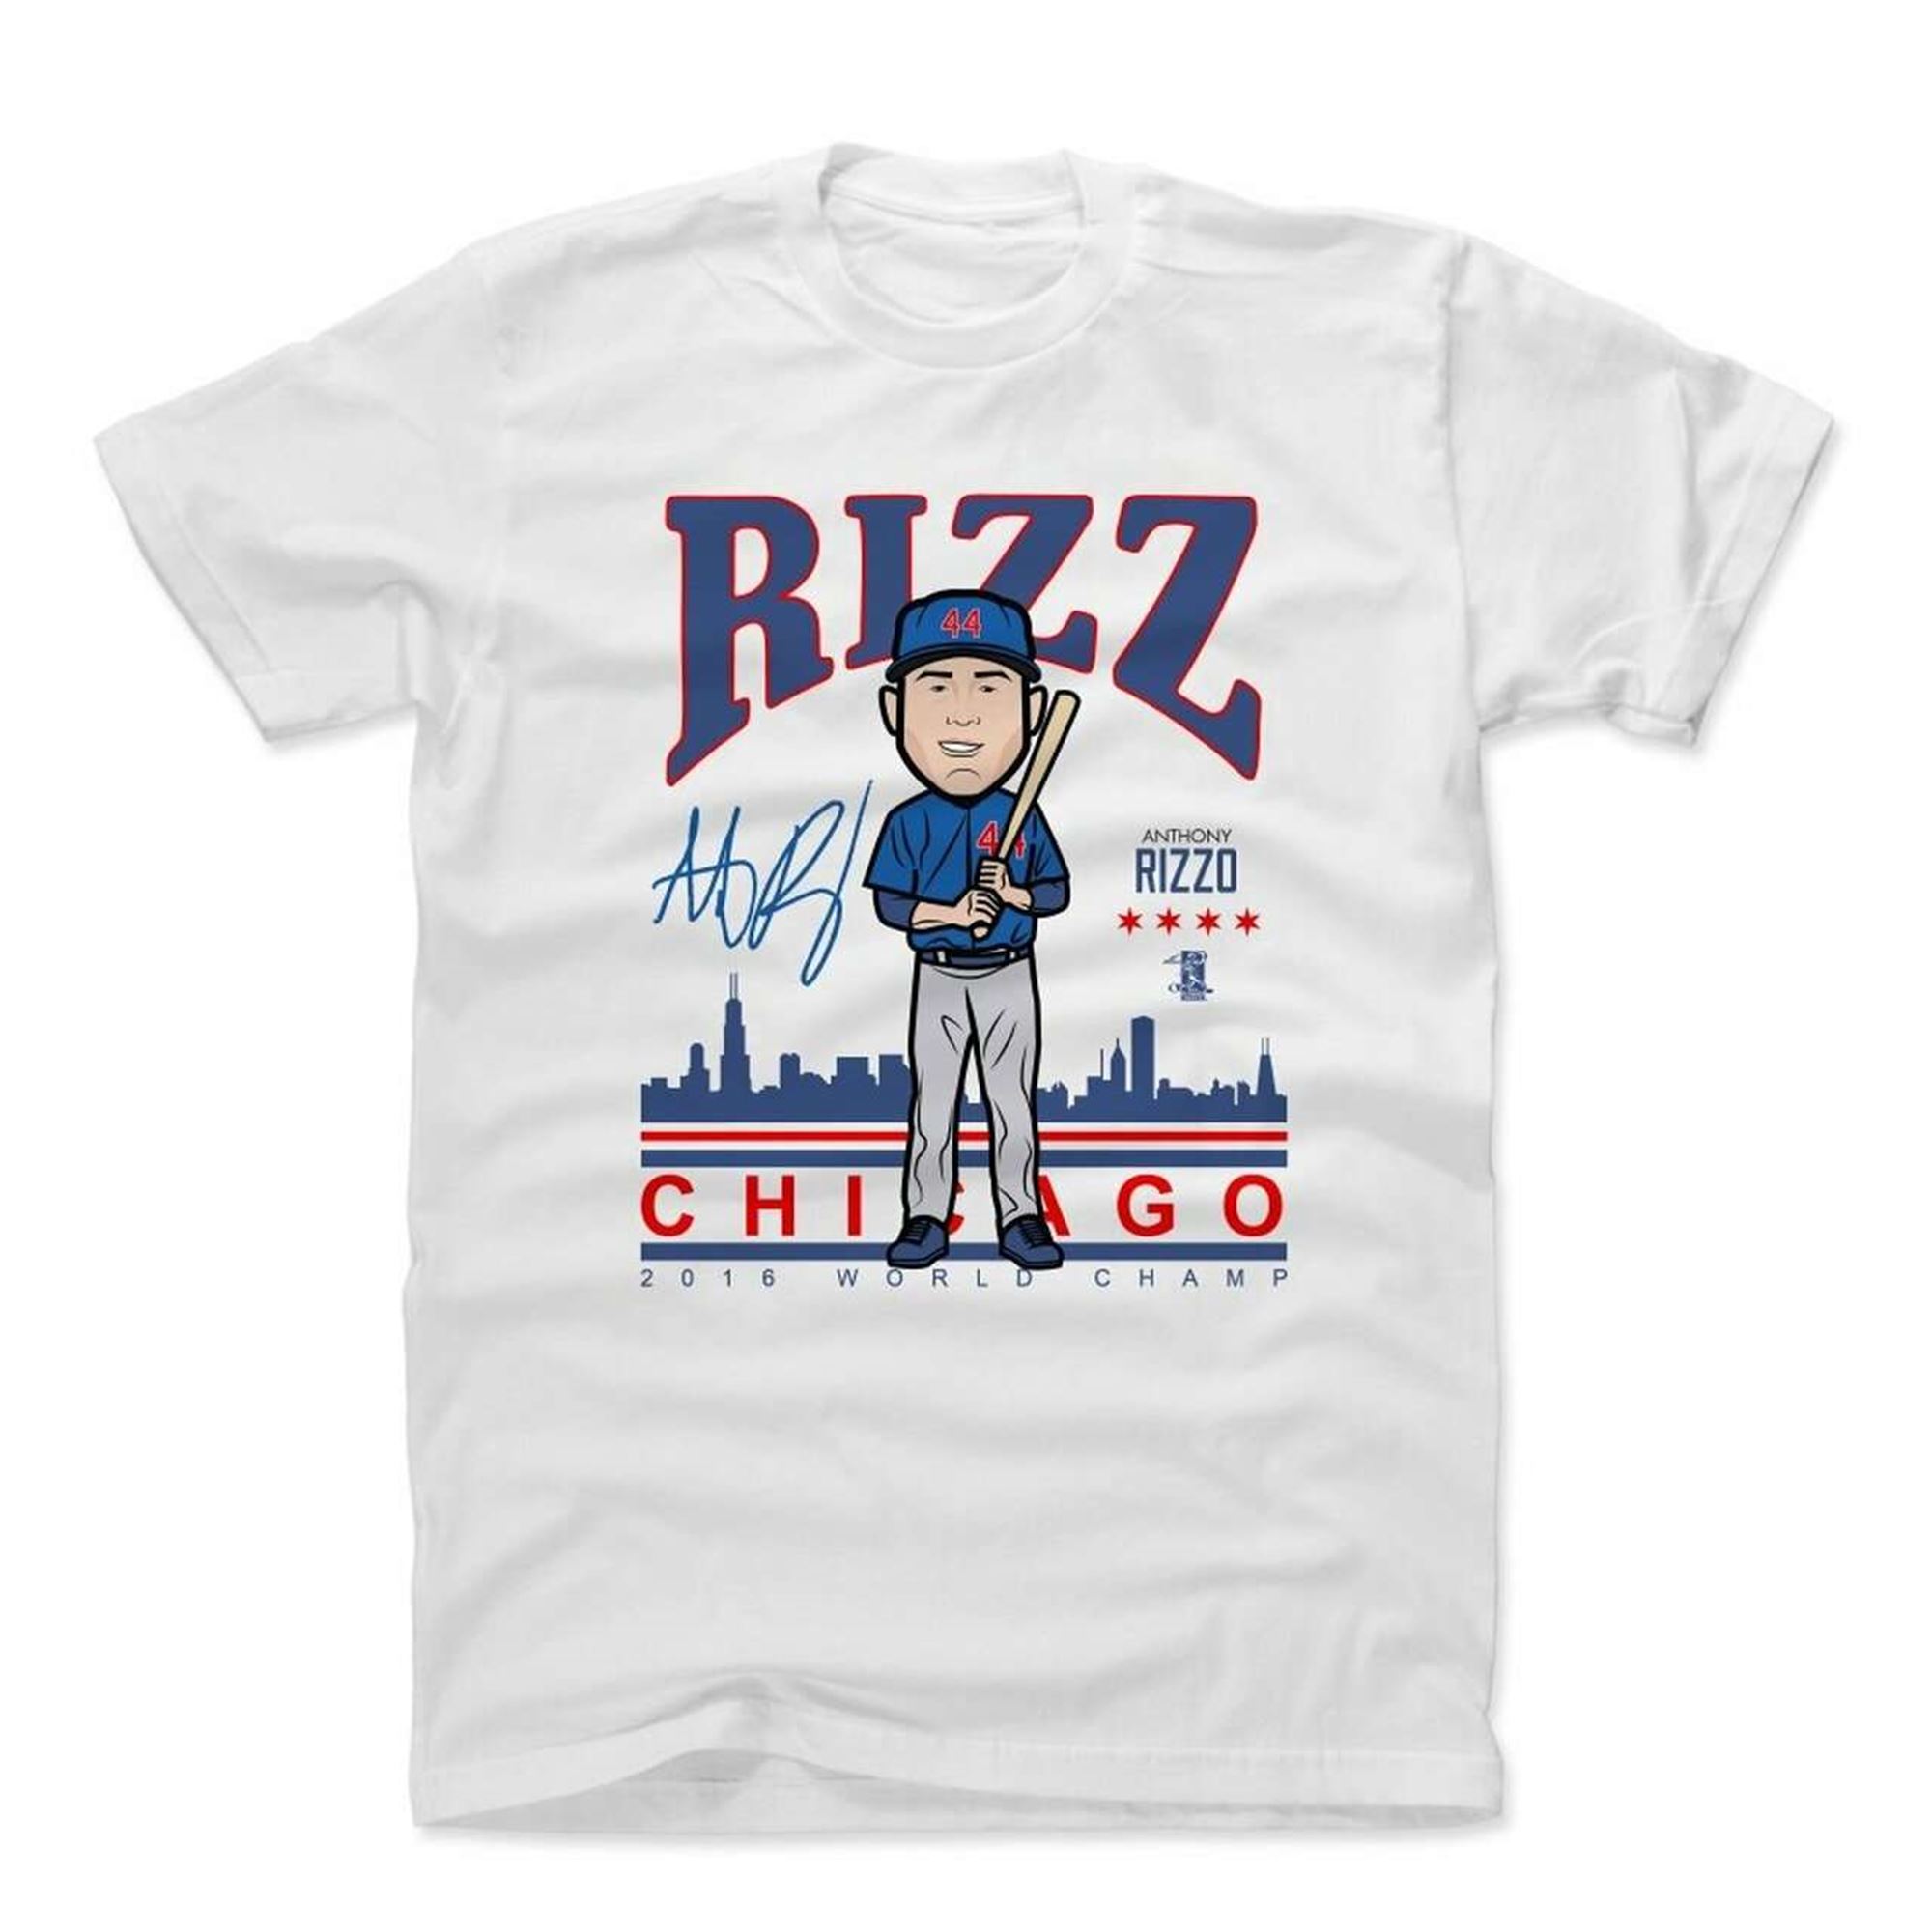 Anthony Rizzo Chicago Baseball T Shirt Full Size Up To 5xl